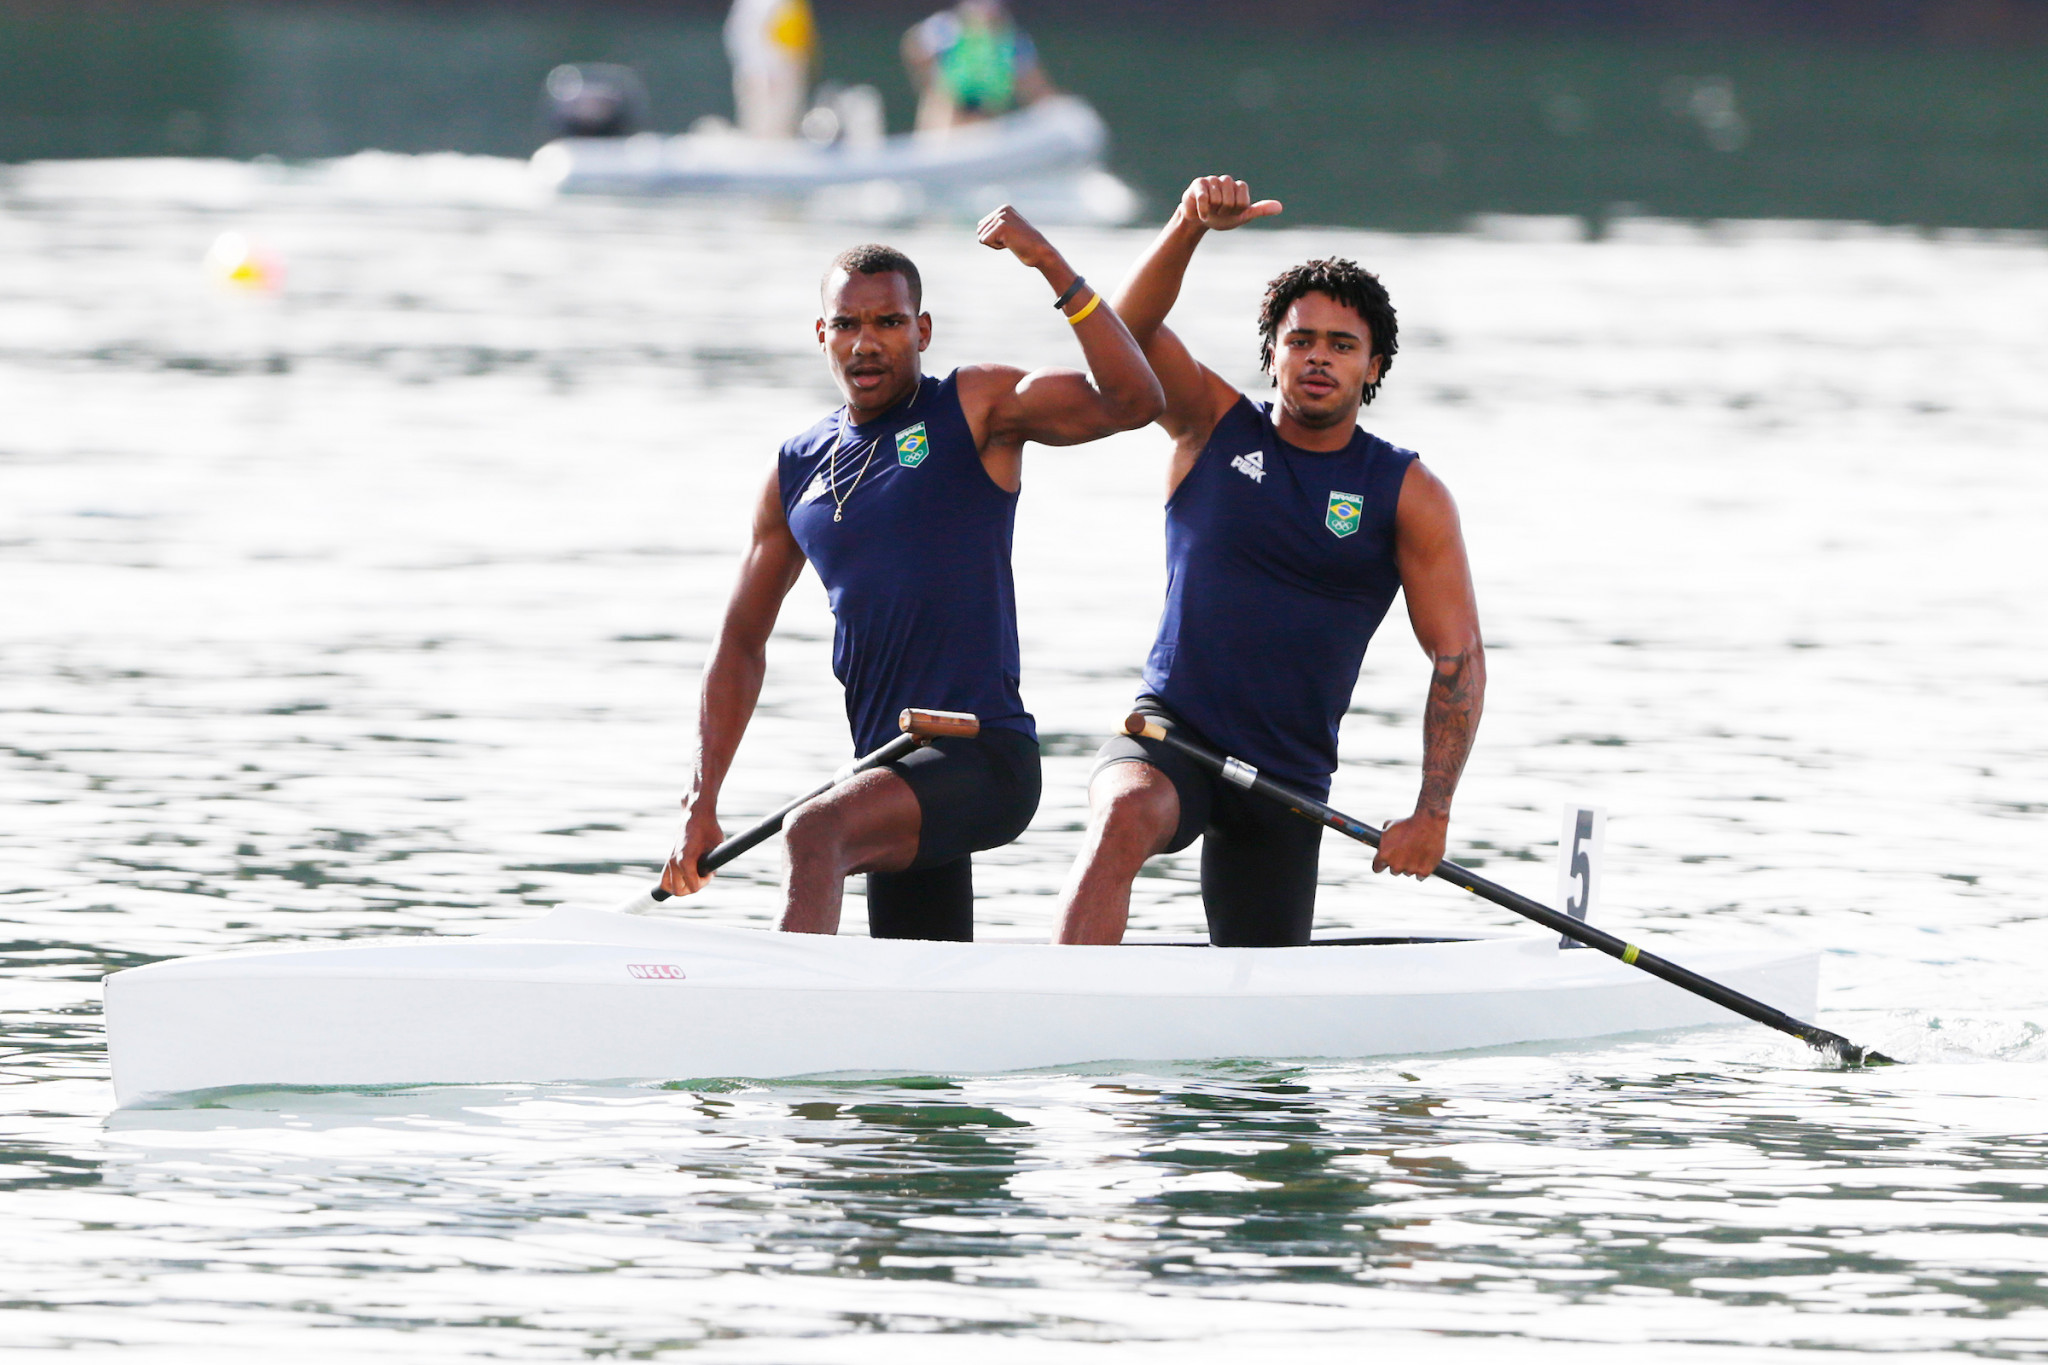 Diego Nascimiento, left, and Evandilson Neto won gold for Brazil in the men's C2 1000 metres final with a time of 3mins 30.12secs ©Agencia.Xpress Media